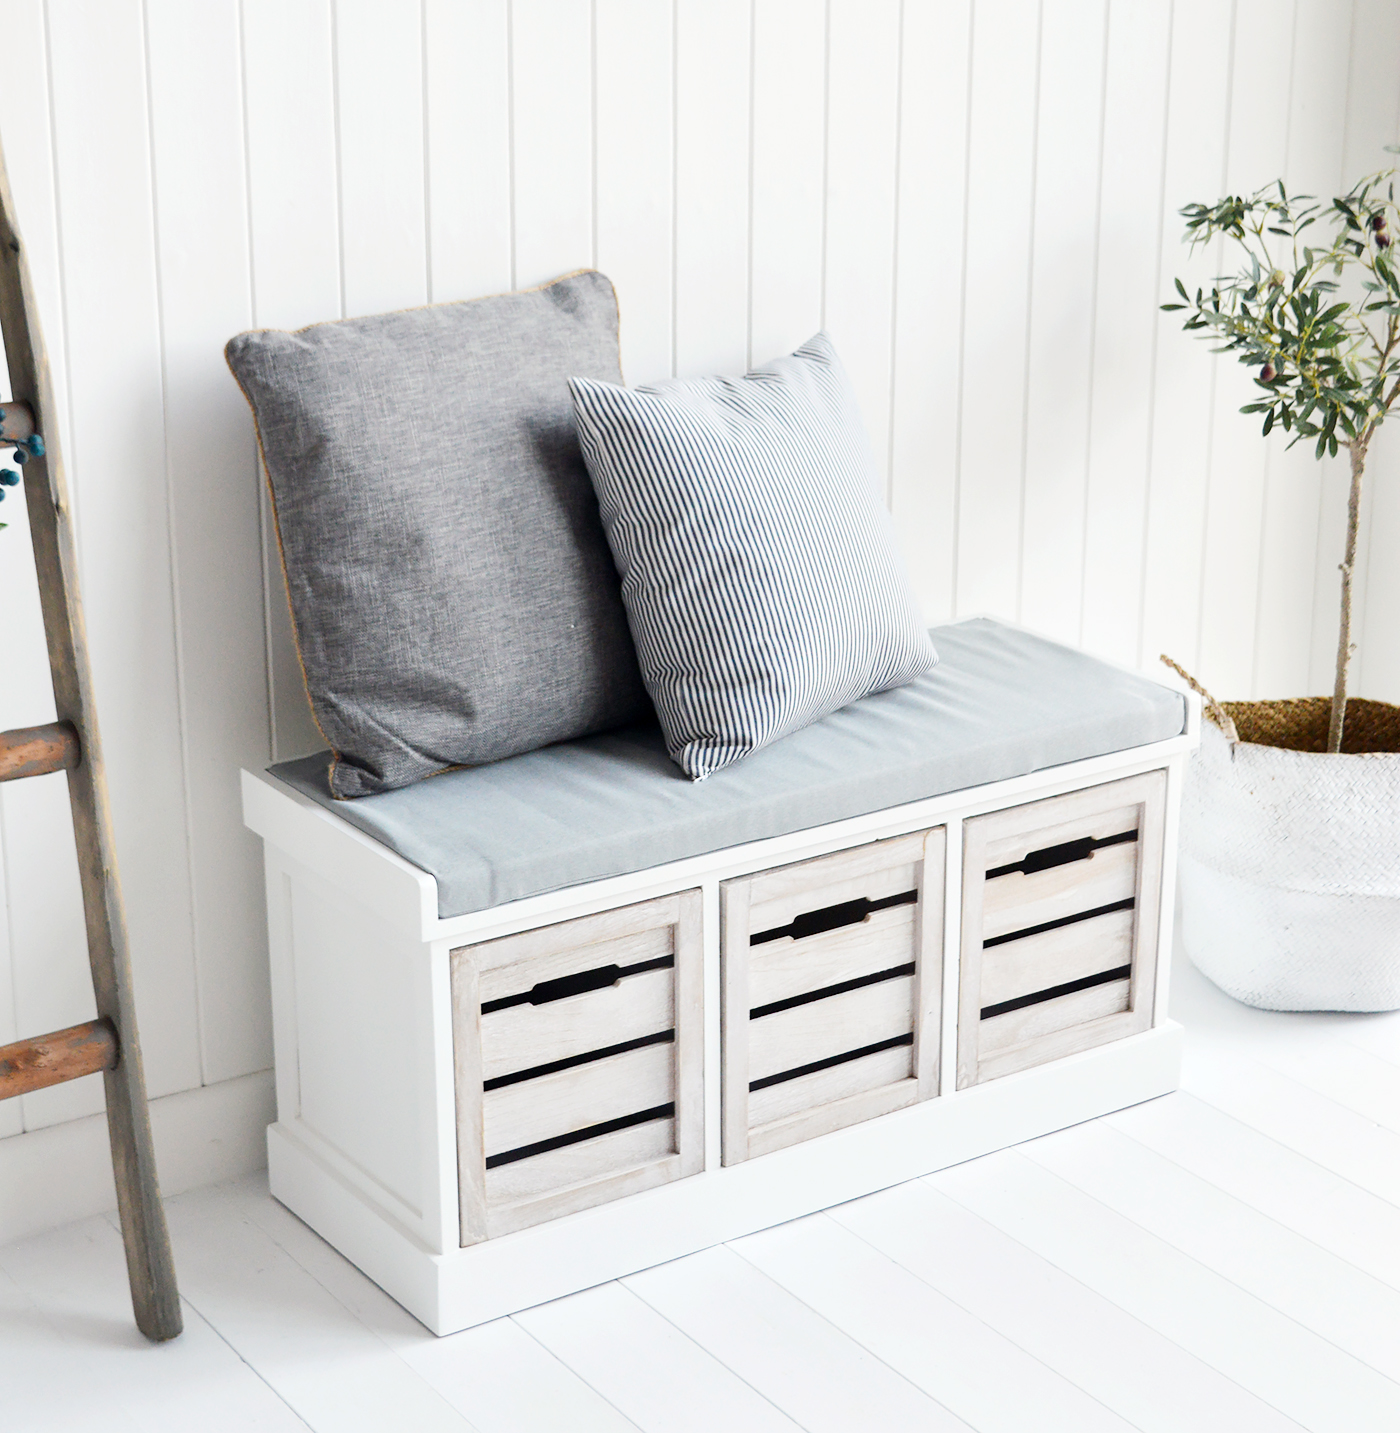 Hallway furniture New England, Coastal Country and City. Hartford white and grey storage bench seat with three drawers for storage